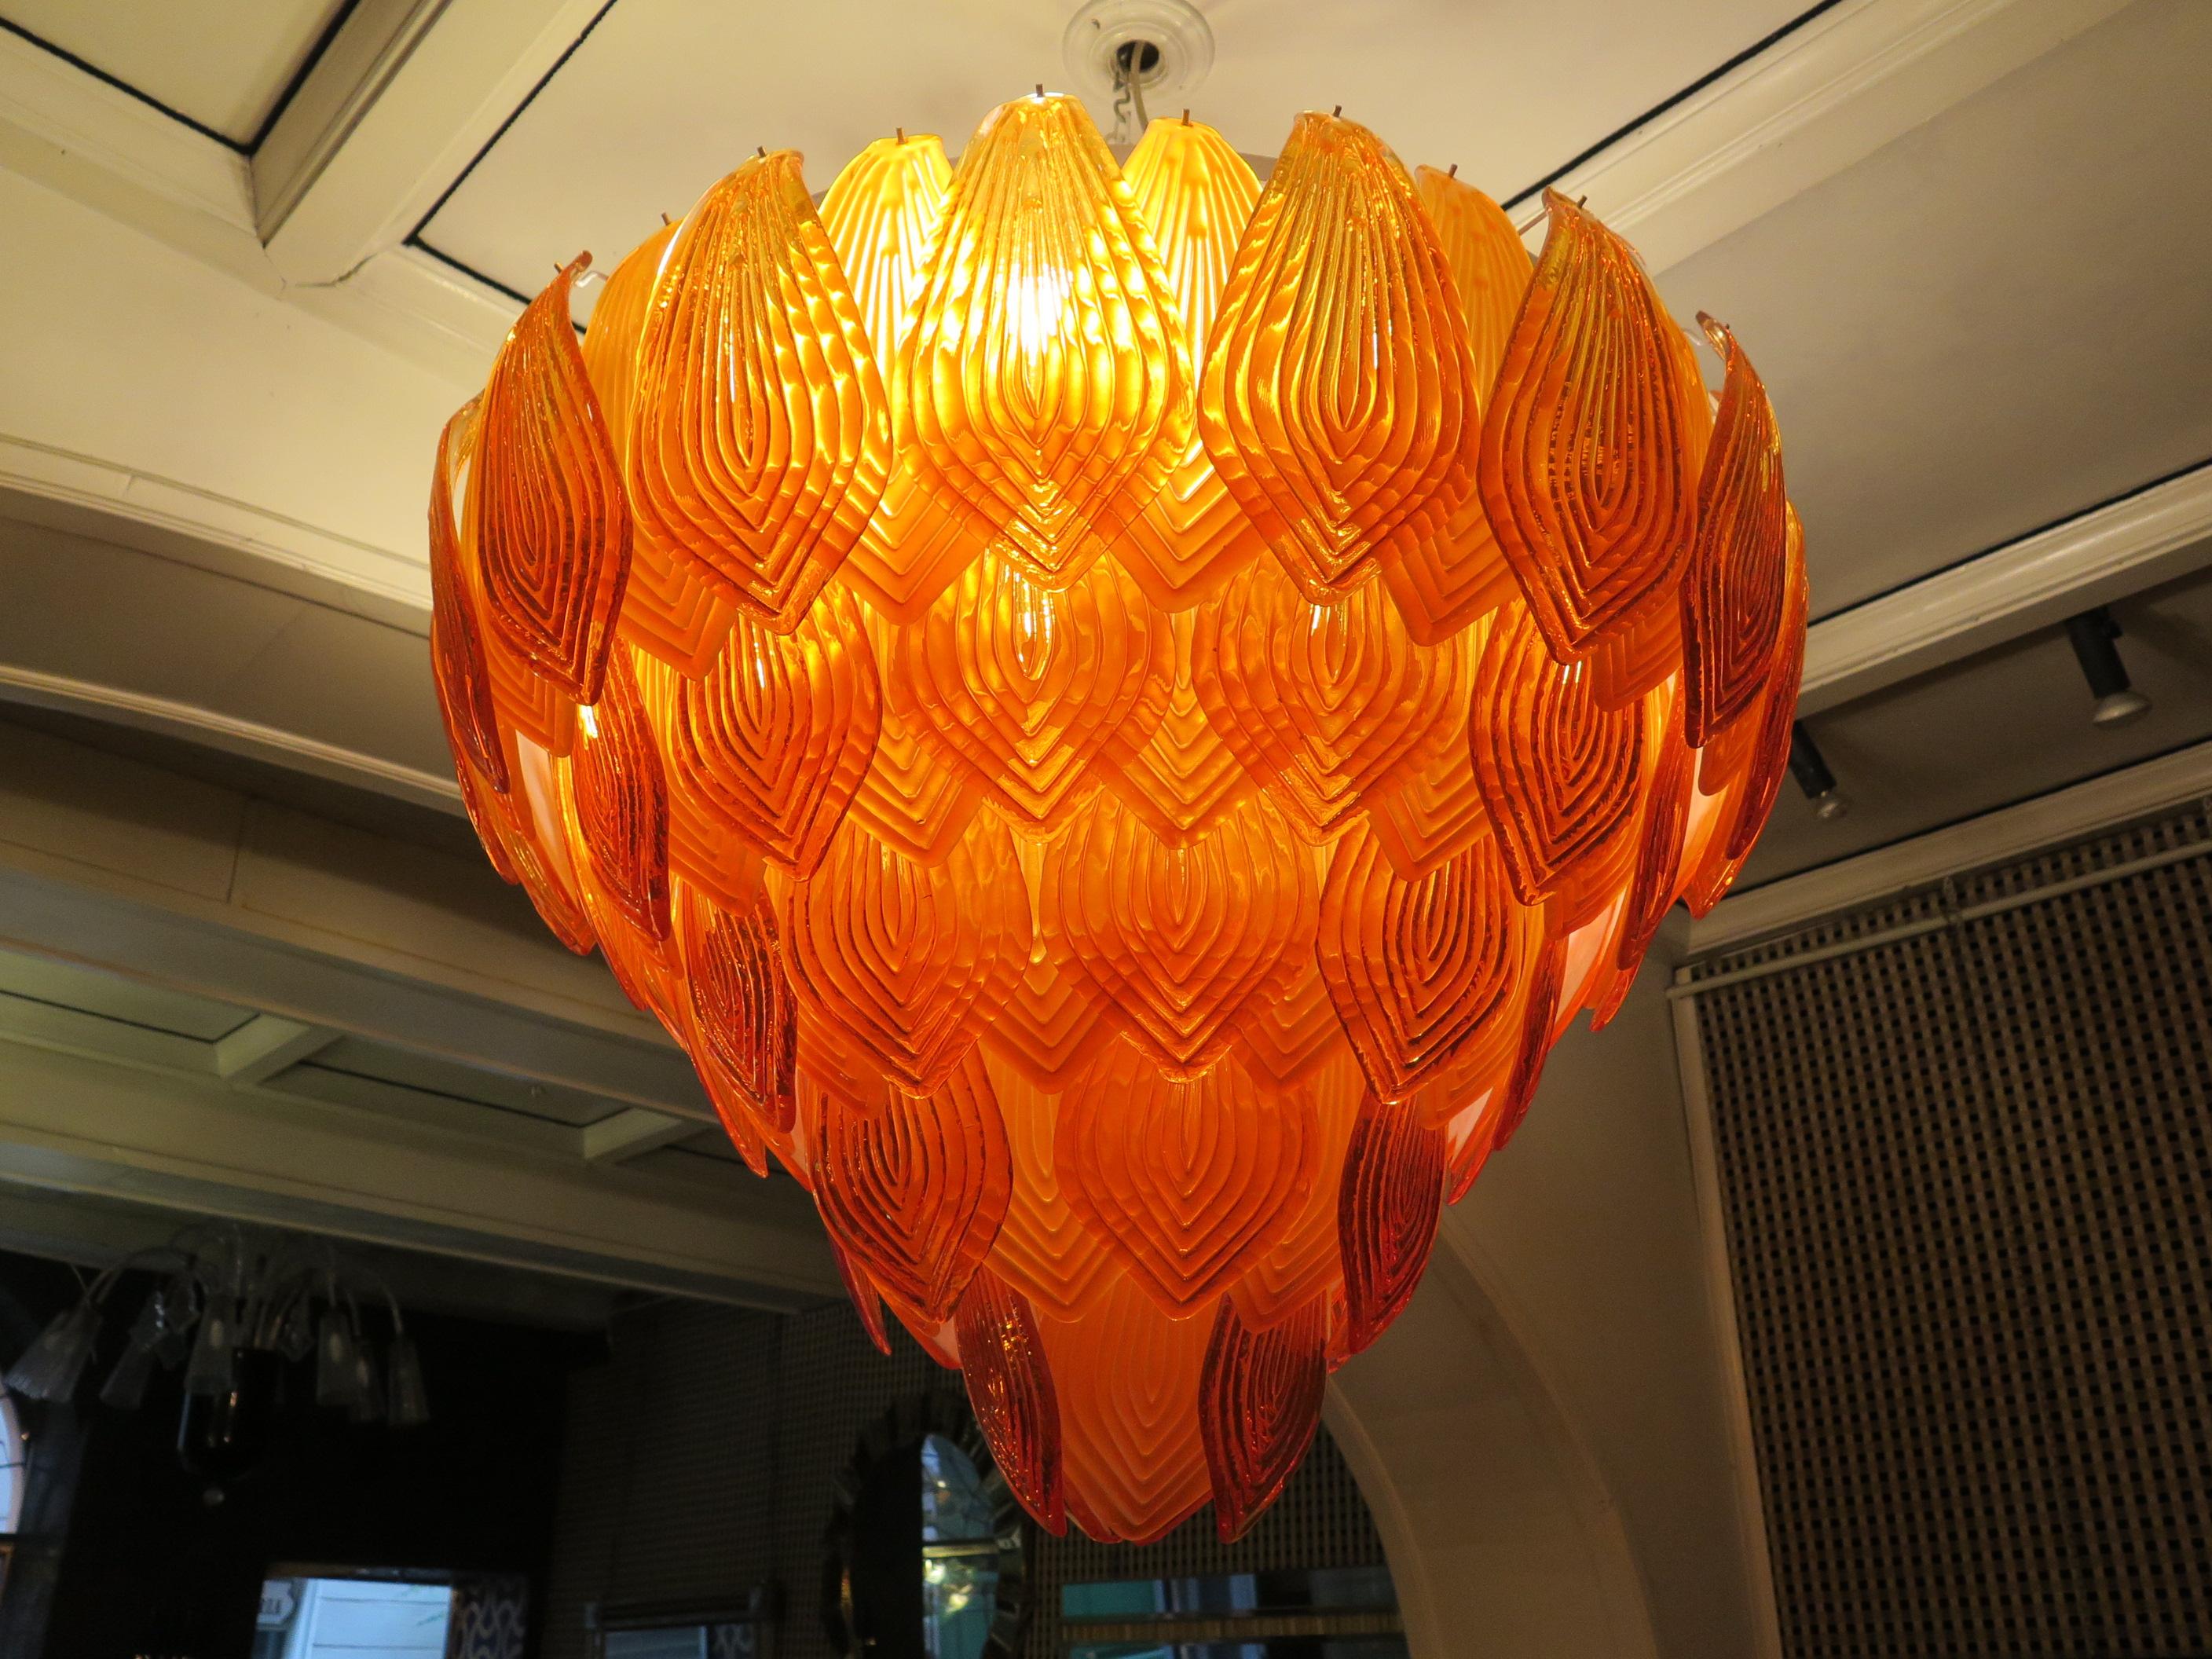 Murano art glass chandelier. Of the first half of the 20th century. Fantastic Venetian orange color. Put in evidence precisely from the first photo, a striking color for this chandelier.

All in Murano art glass, with orange leaves placed all